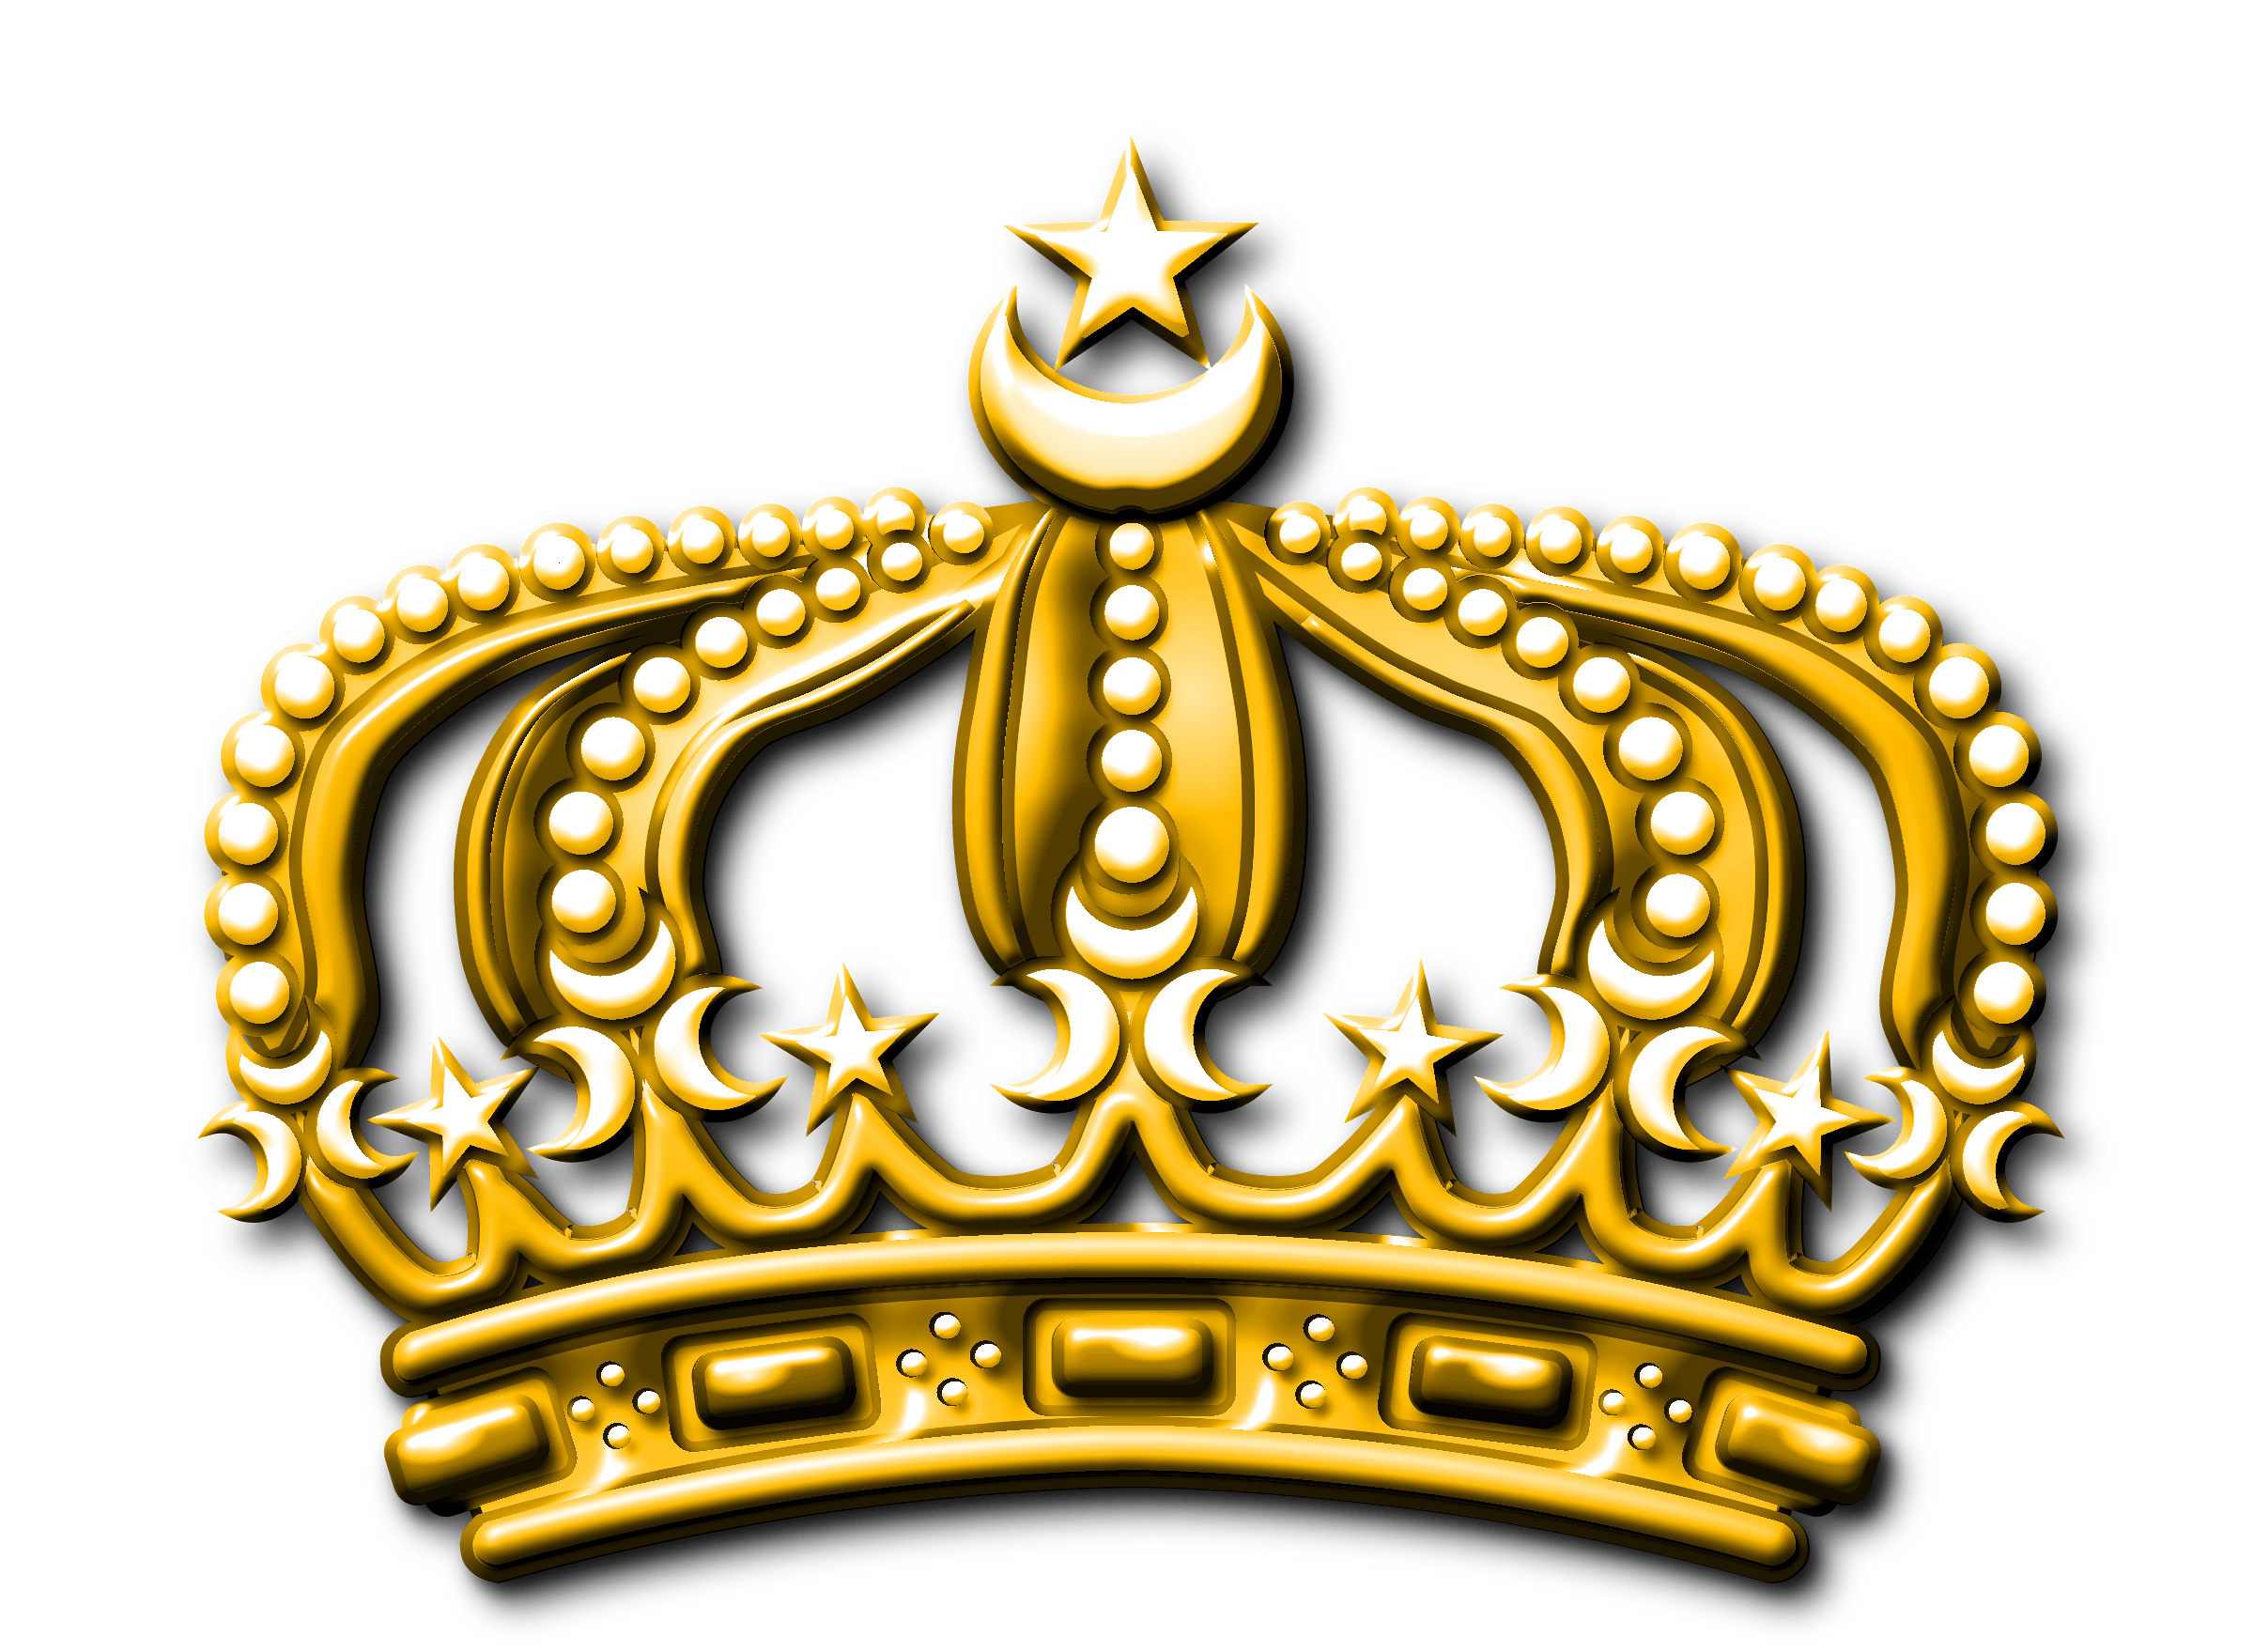 Yellow and White Crown Logo - Best Black And White Crown